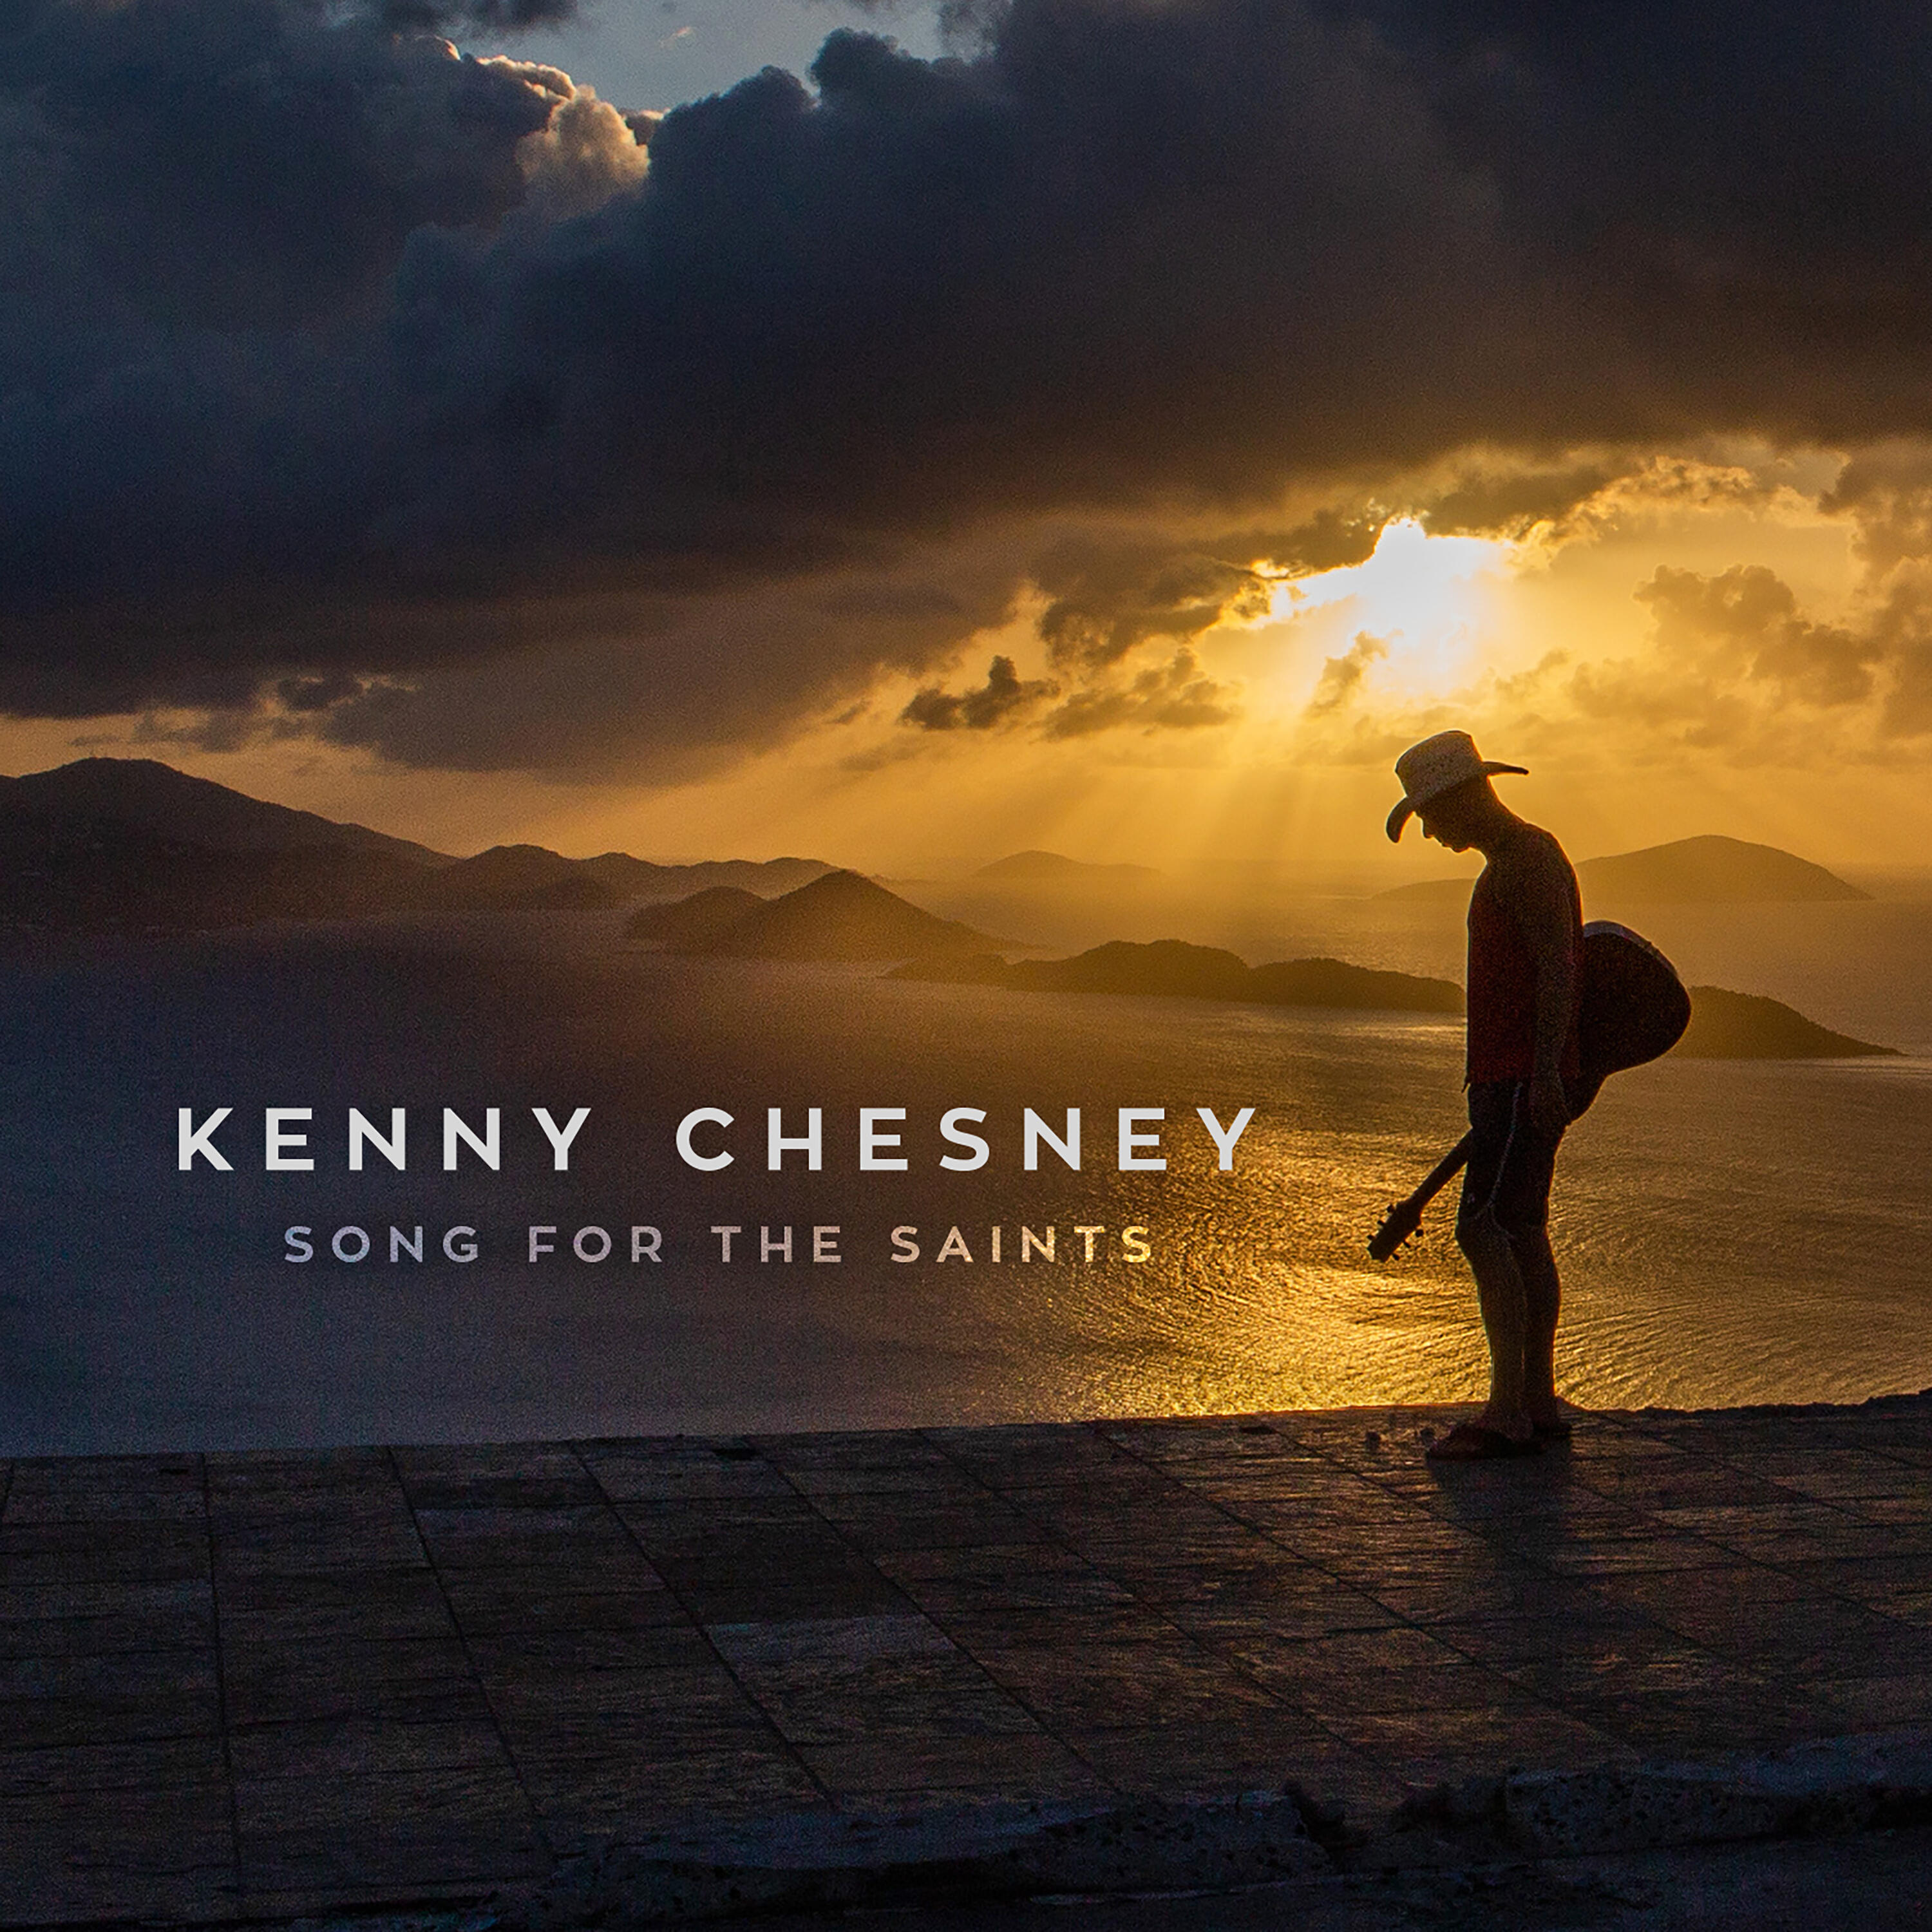 kenny chesney songs for the saints winrar download free